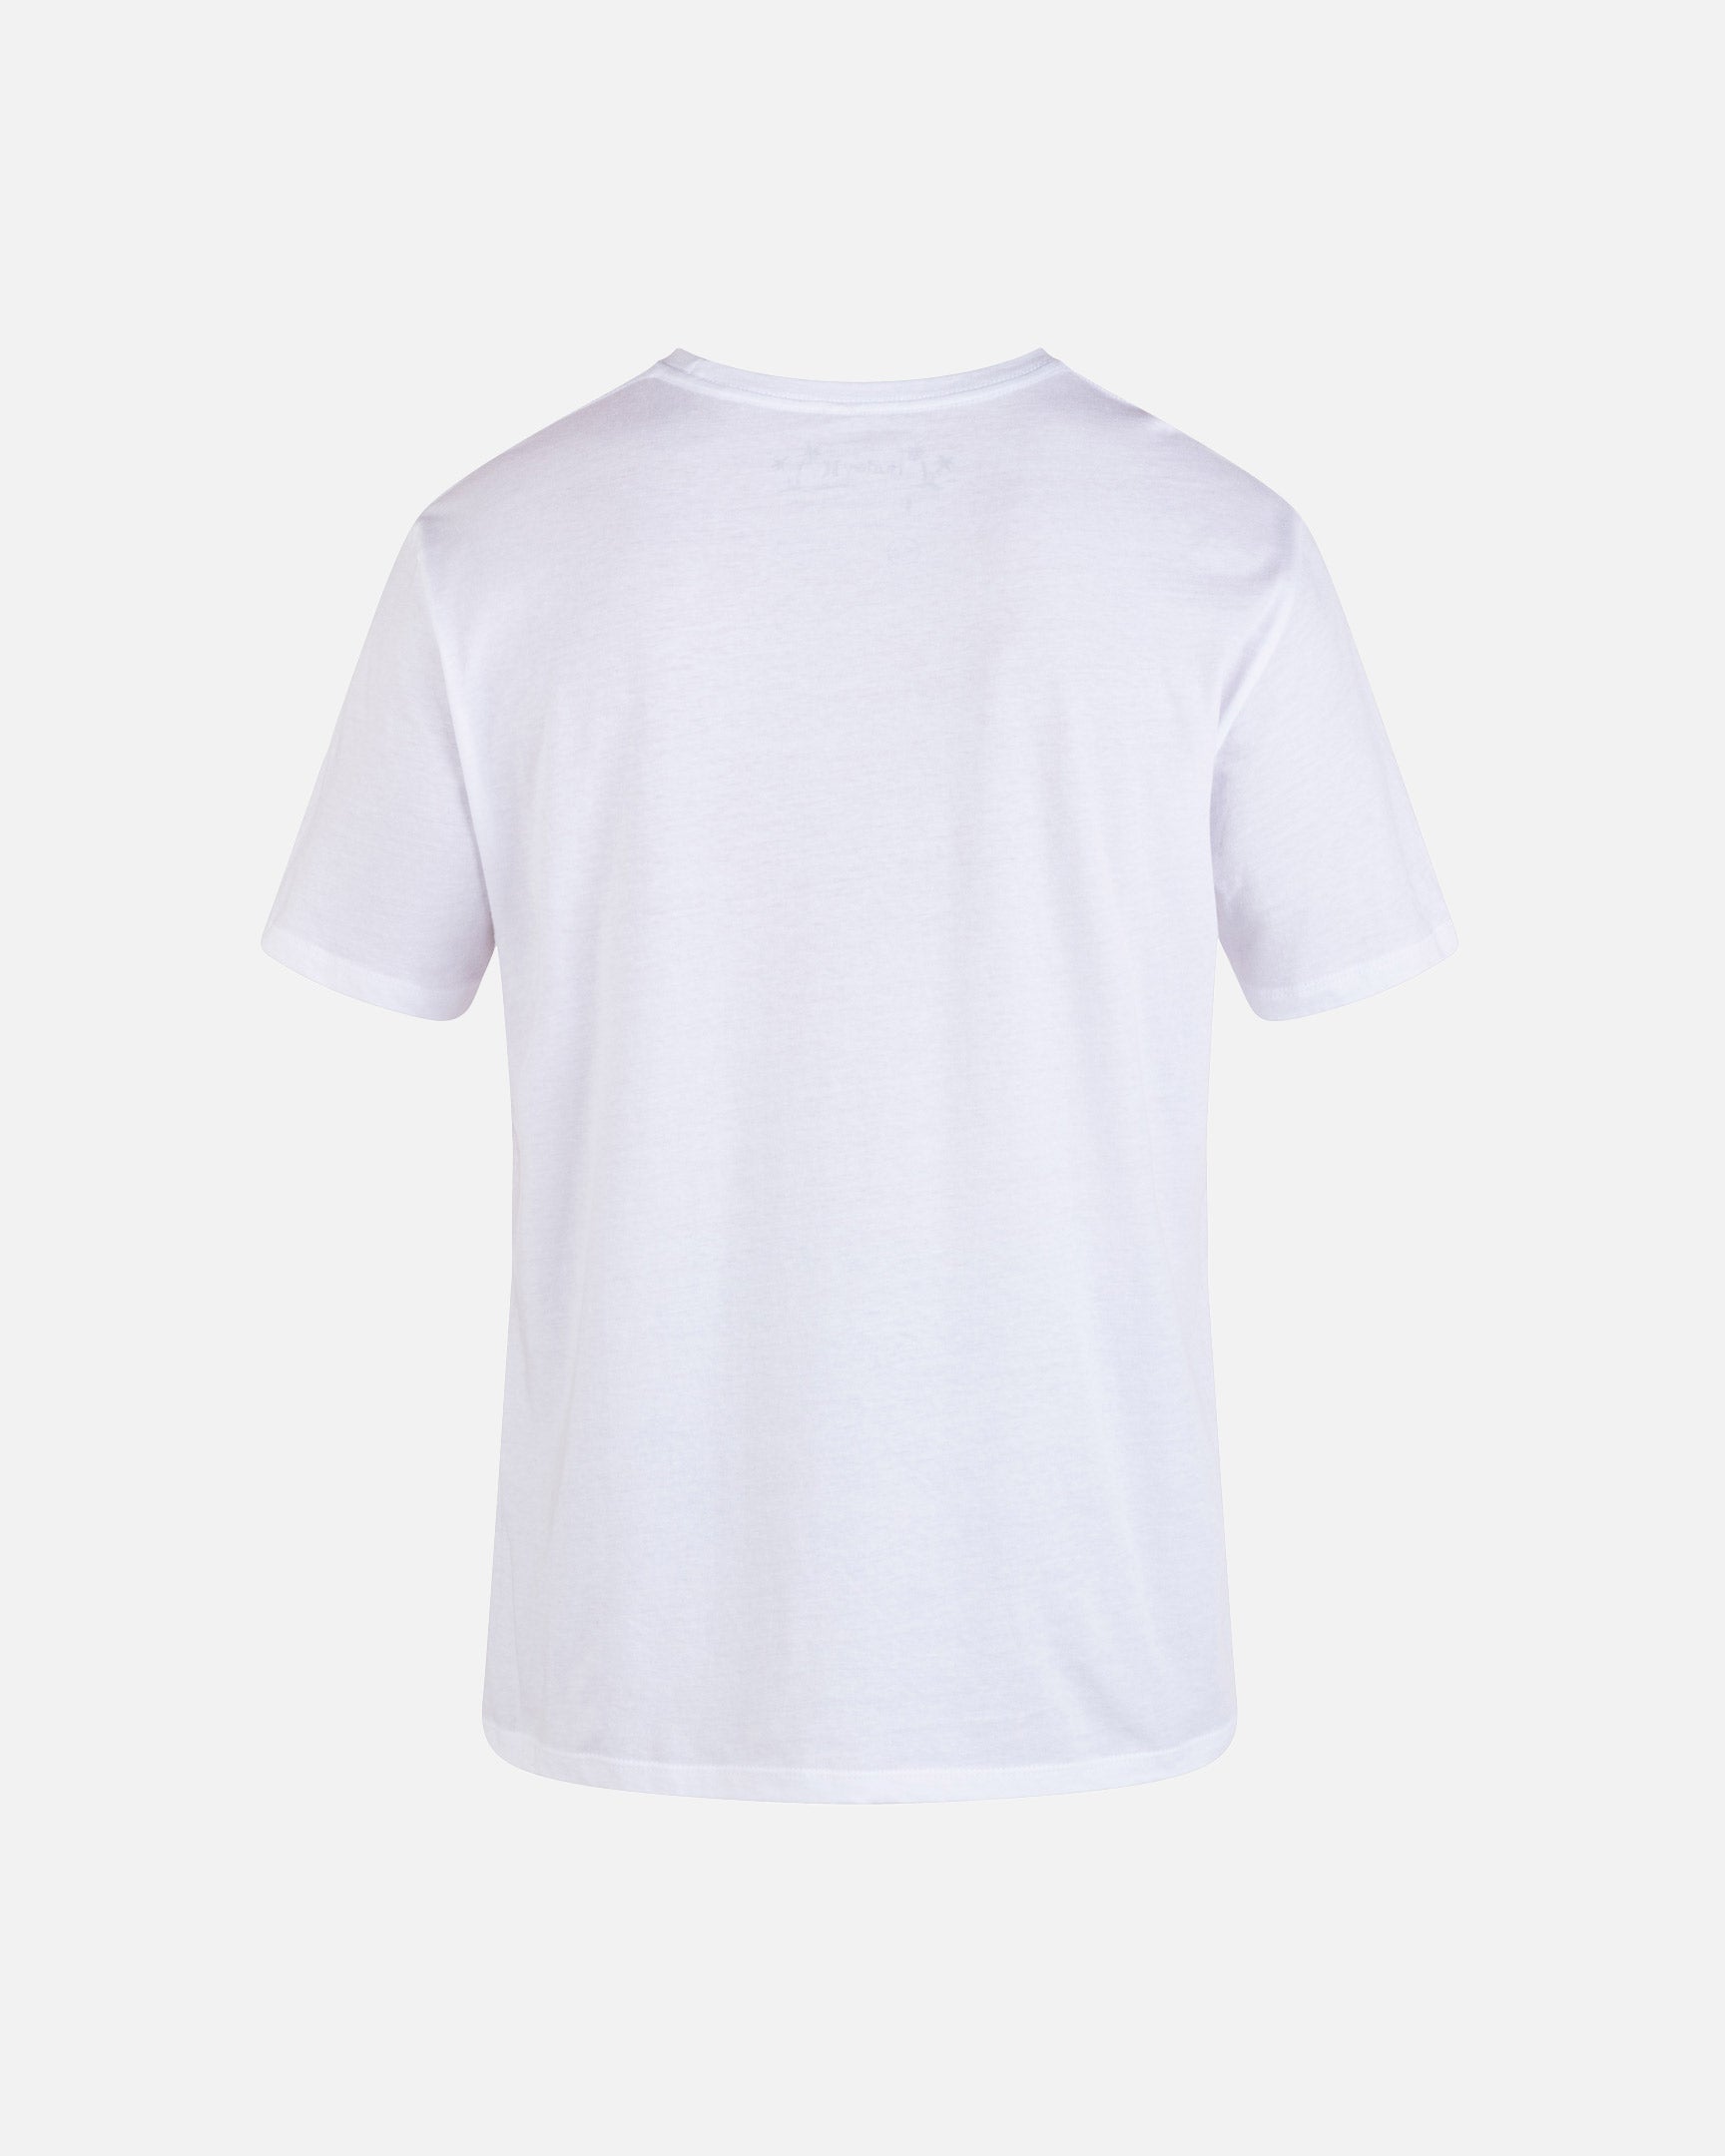 White - Everyday One and Only Solid T-Shirt